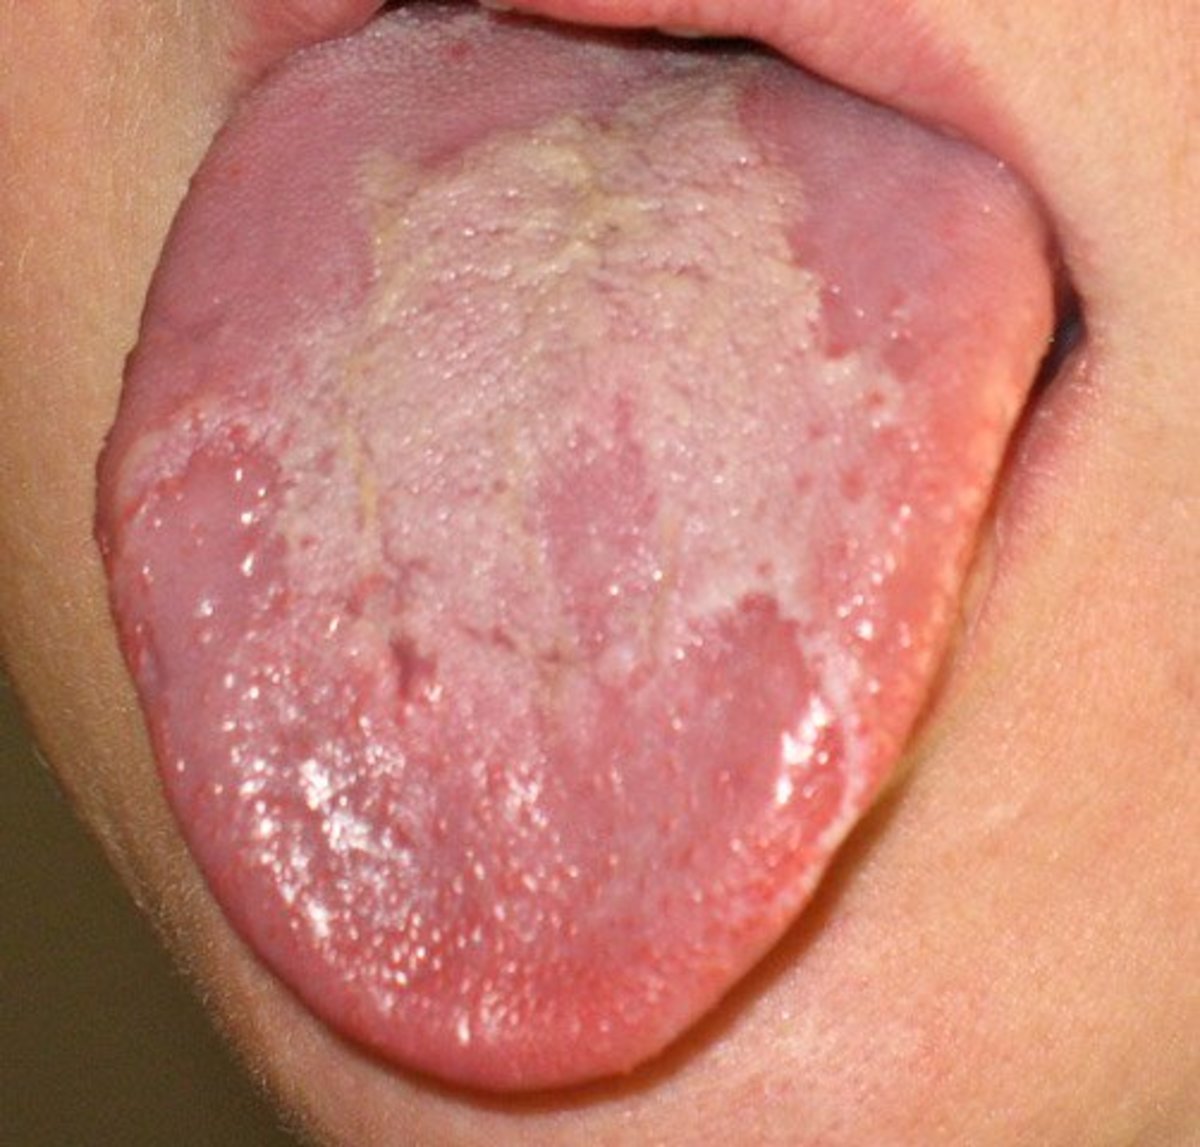 An image of a geographic tongue